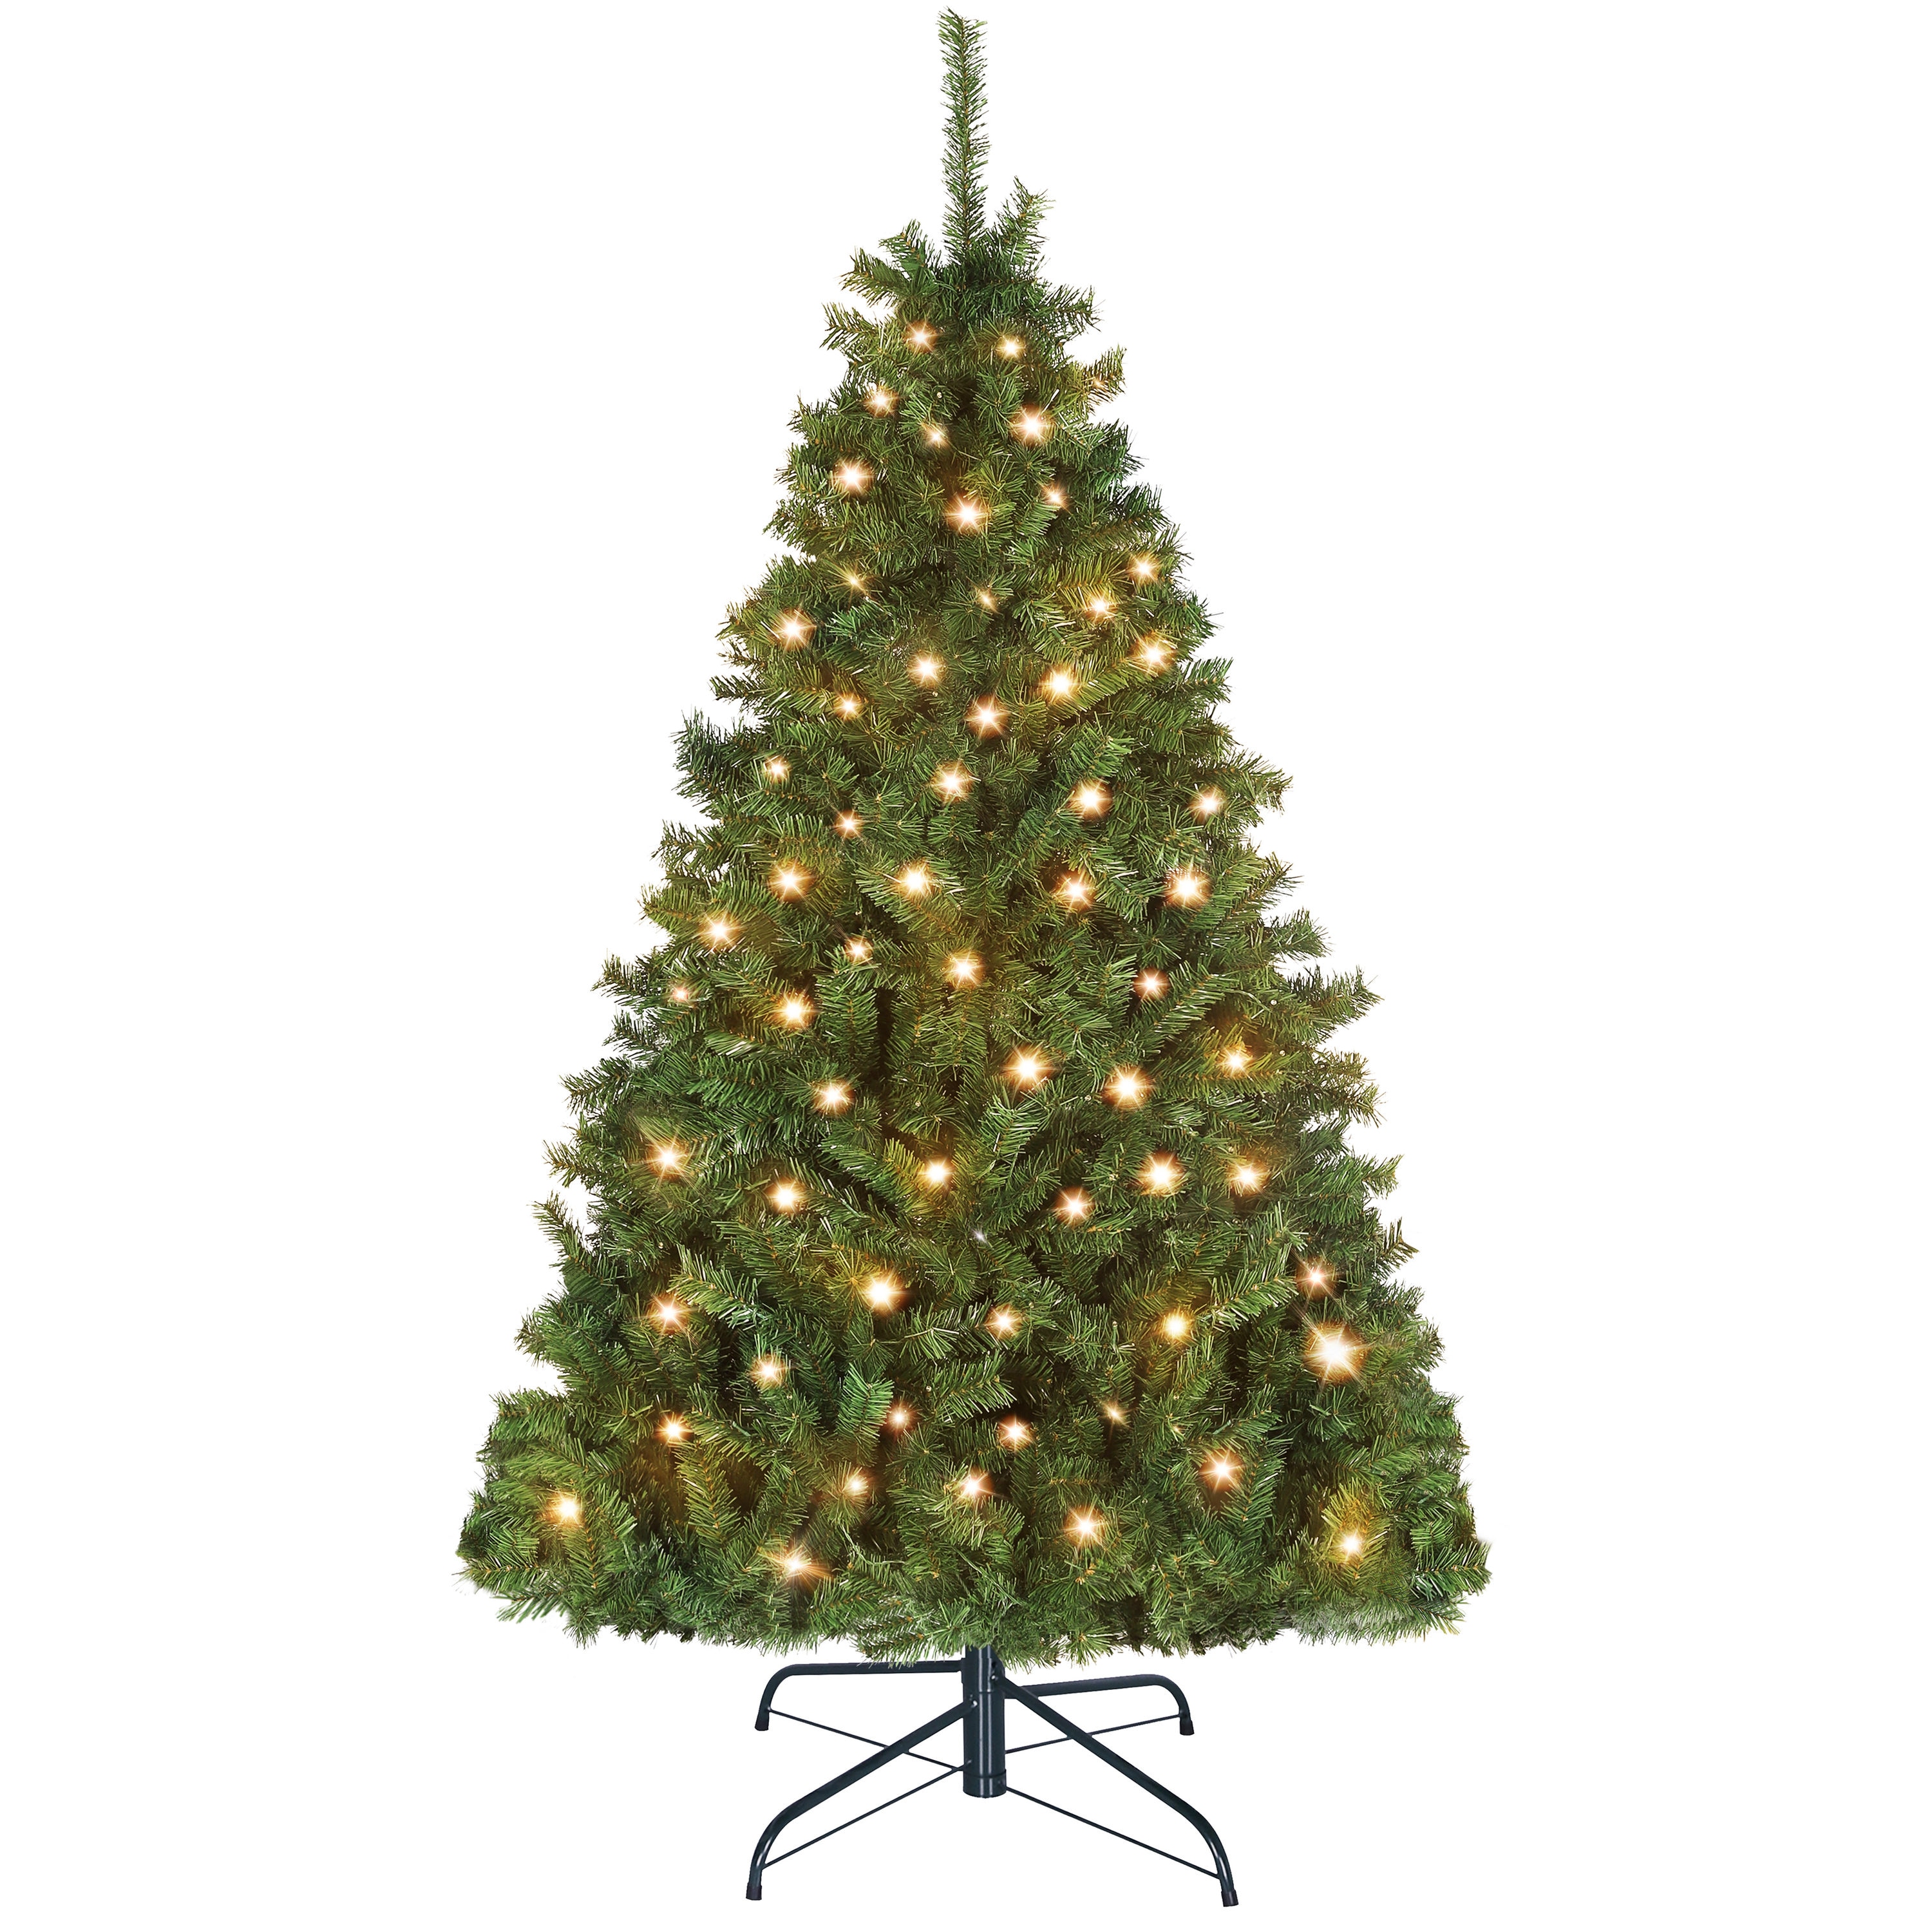 28 cm Multi-Colour WeRChristmas Pre-Lit Wooden Christmas Tree Decoration with 5 Warm White LED Lights